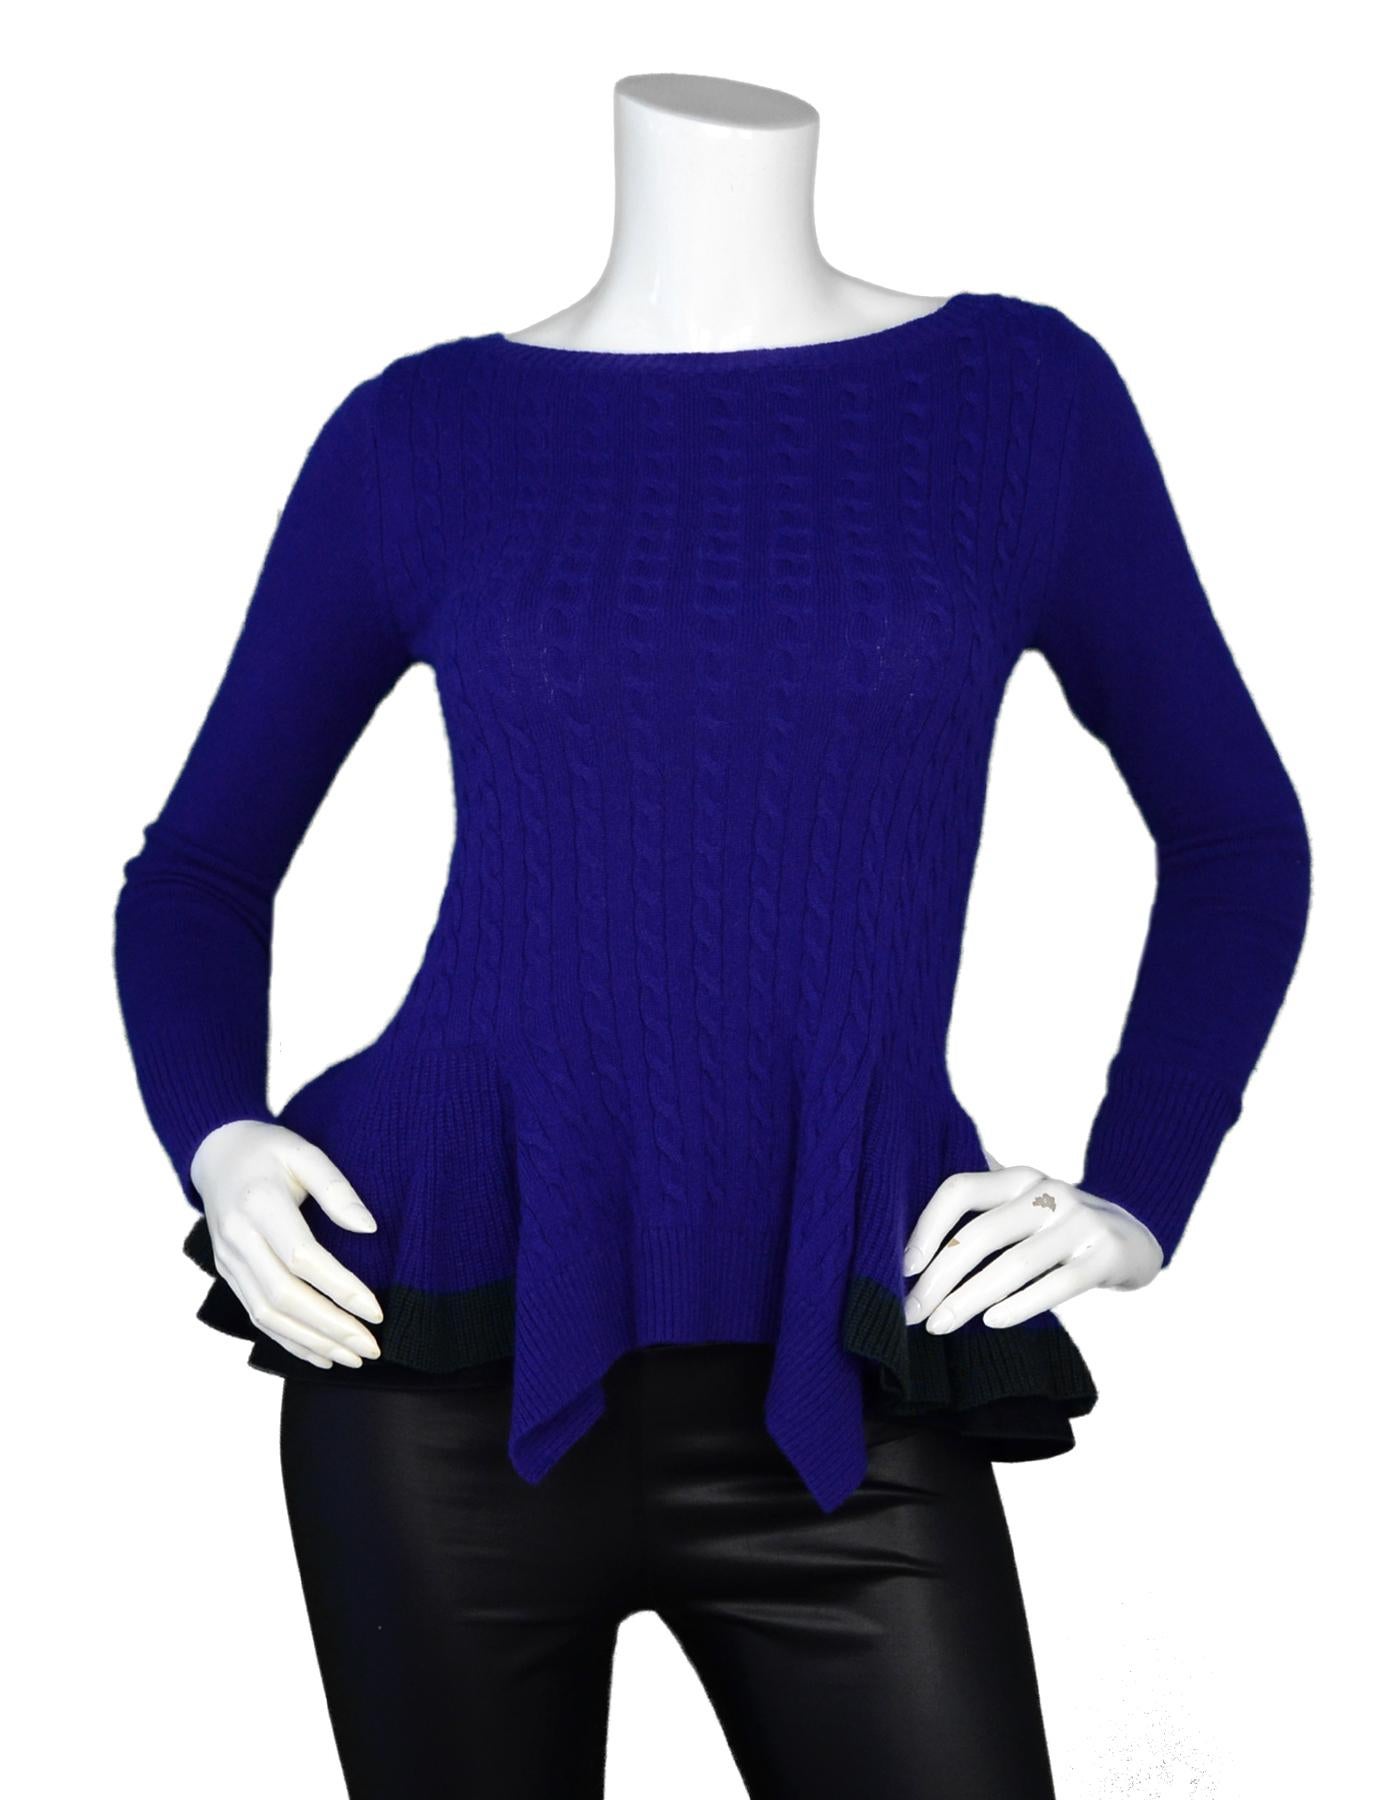 Sacai Luck Blue Cable Knit Peplum Sweater Sz 1/US Small

Made In: Japan
Color: Blue, green
Materials: 40% rayon, 20% wool, 20% angora, 20% nylon, attached parts- 90% wool, 10% nylon 
Opening/Closure: Pull over
Overall Condition: Excellent pre-owned